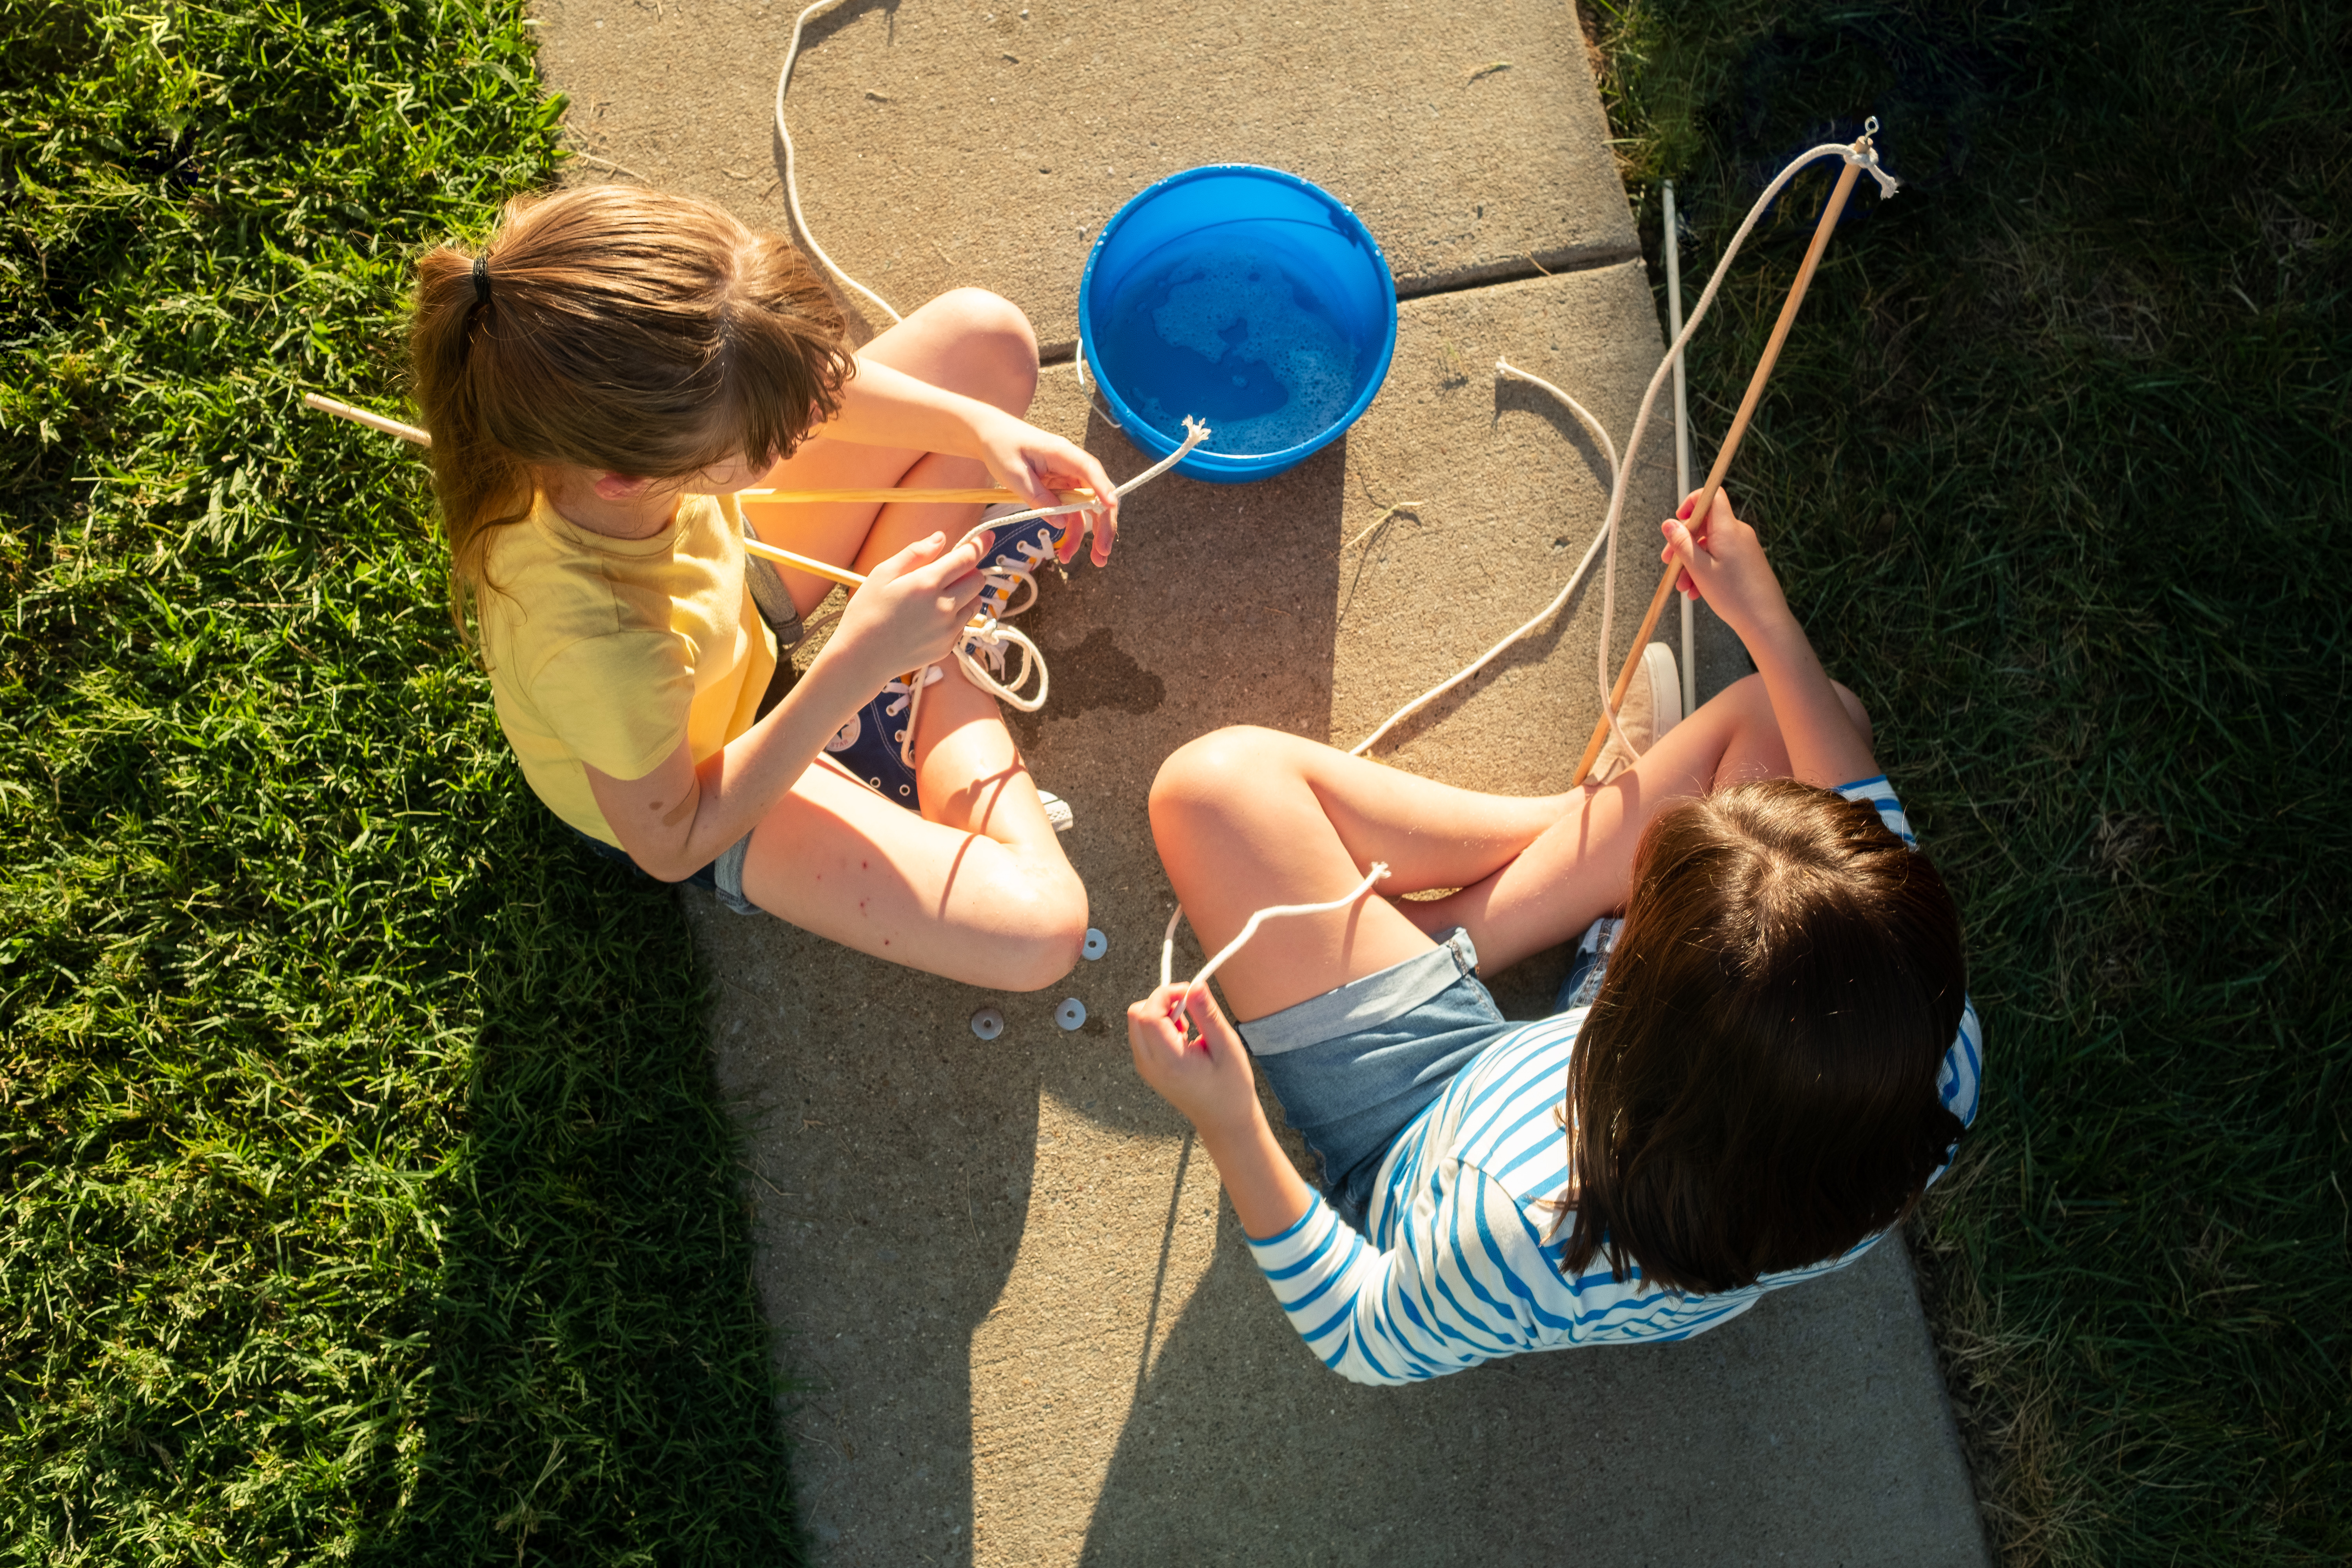 A girl in a yellow shirt and a girl in a blue and white striped shirt sit on a sidewalk next to a blue bucket filled with soapy water.